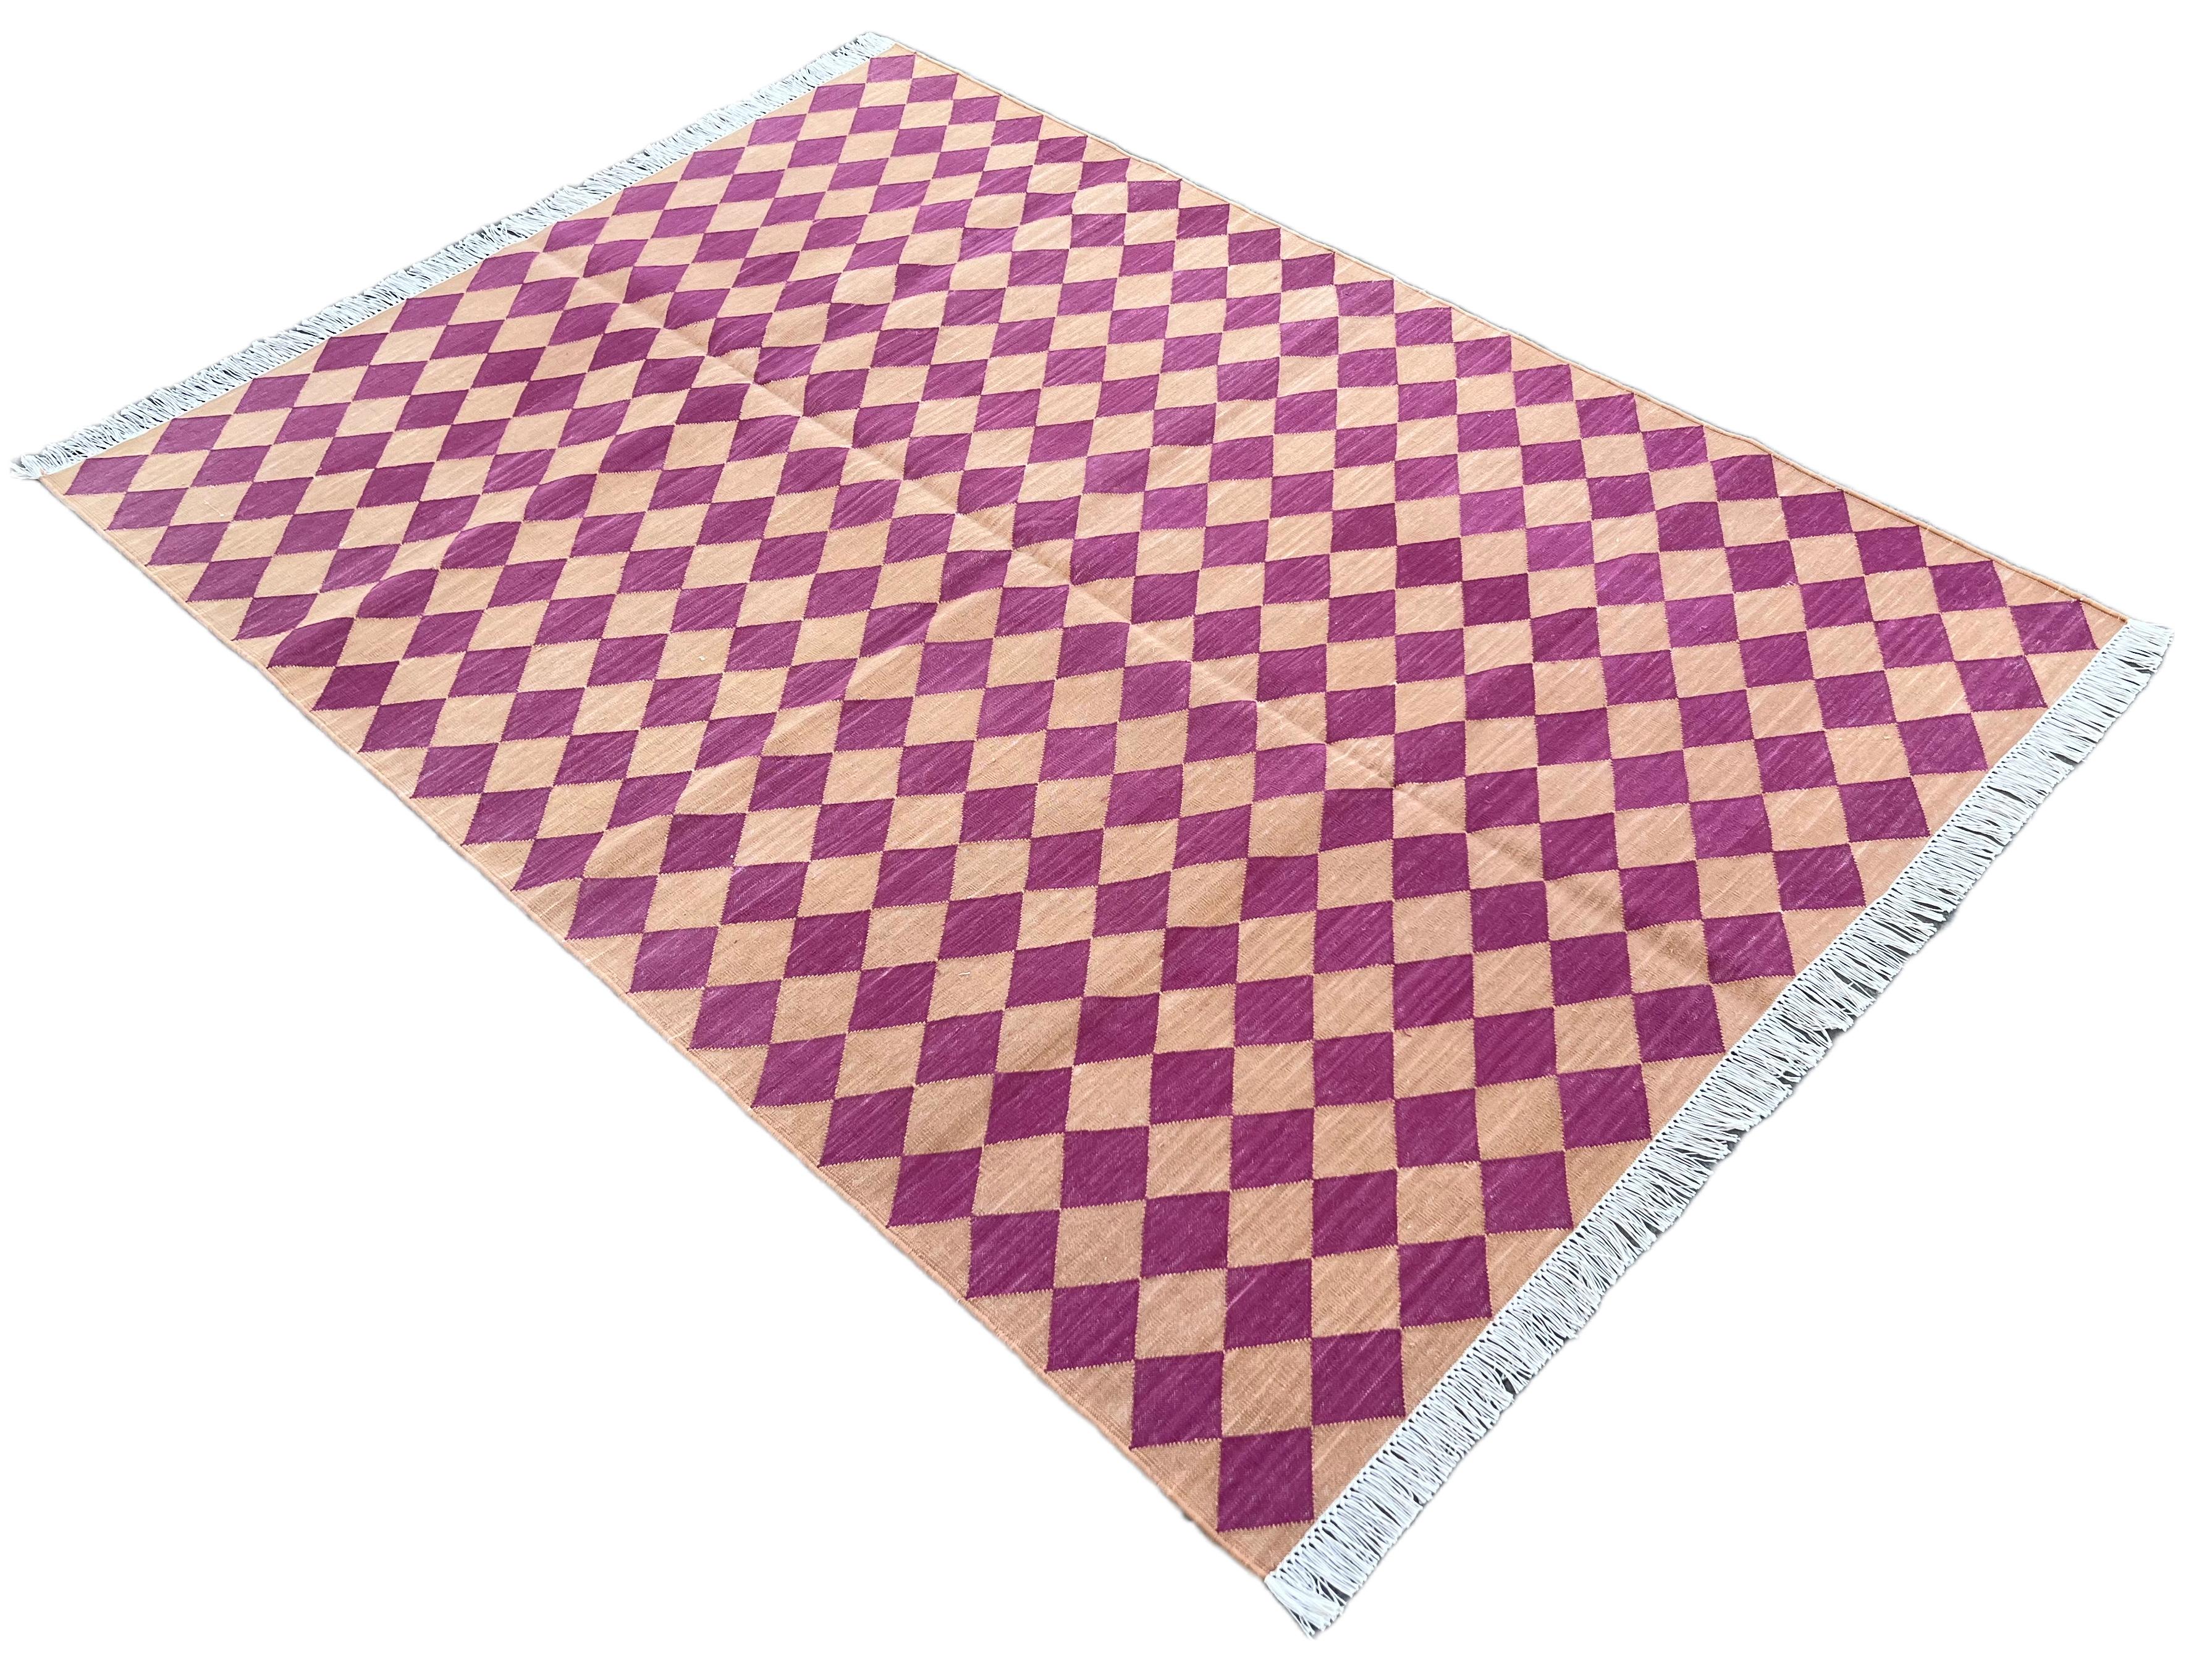 Cotton Vegetable Dyed Raspberry Pink And Tan Checked Indian Rug-4'x6'

These special flat-weave dhurries are hand-woven with 15 ply 100% cotton yarn. Due to the special manufacturing techniques used to create our rugs, the size and color of each